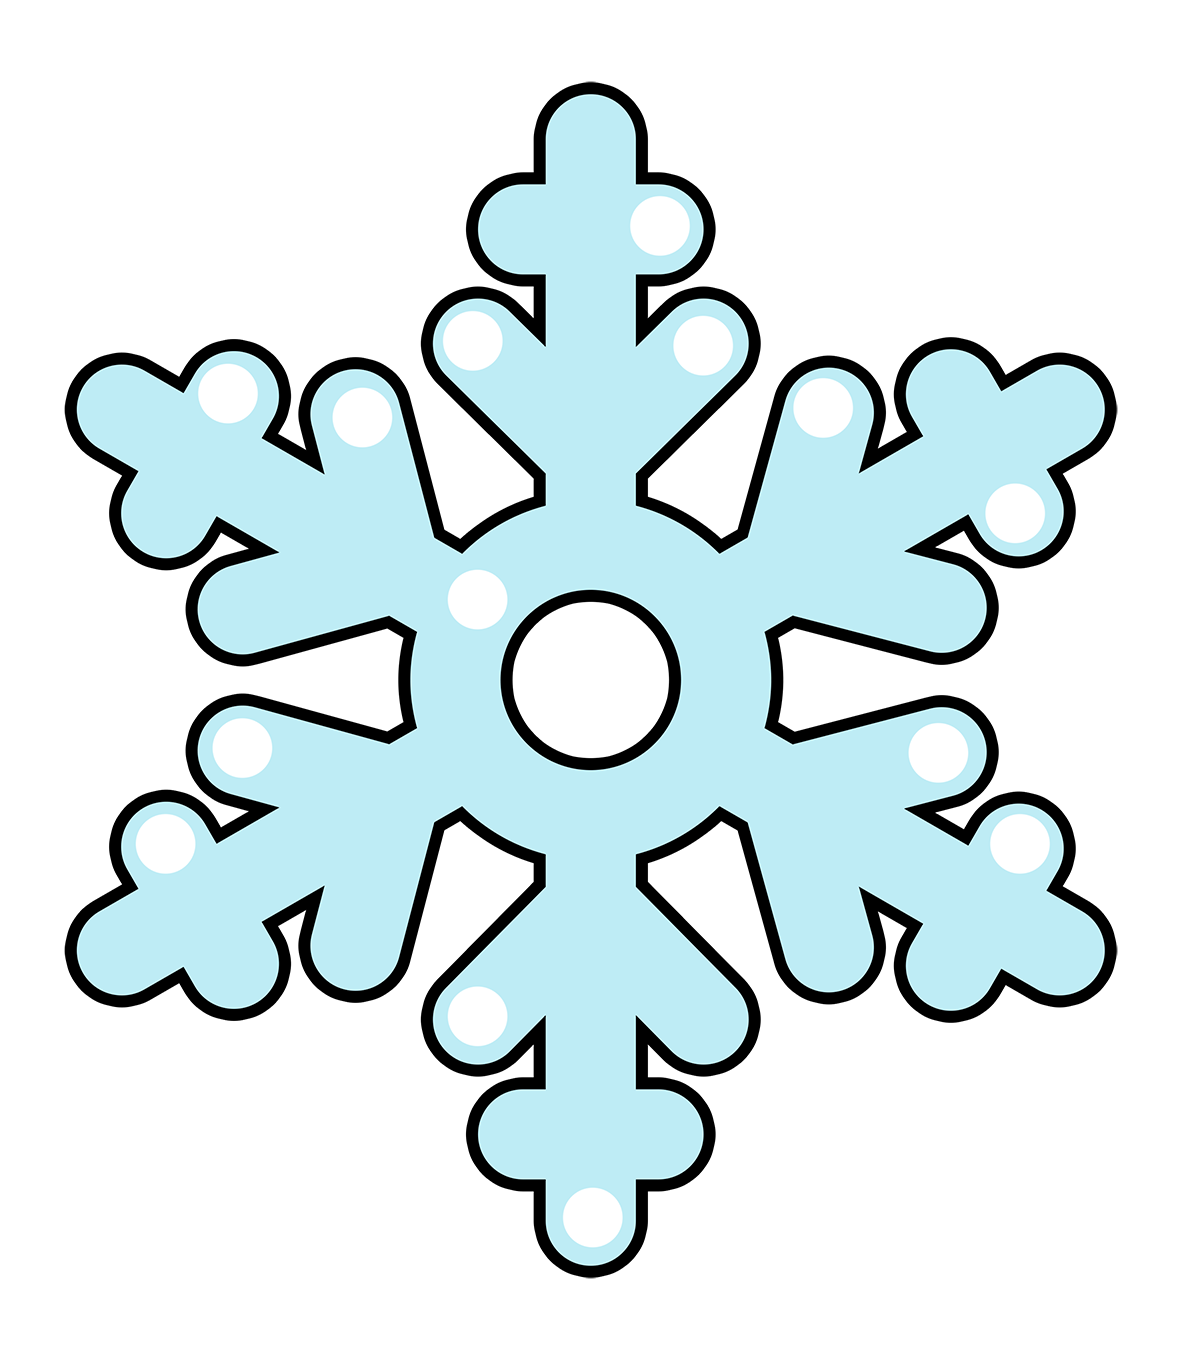 Snowflake free to use cliparts 2